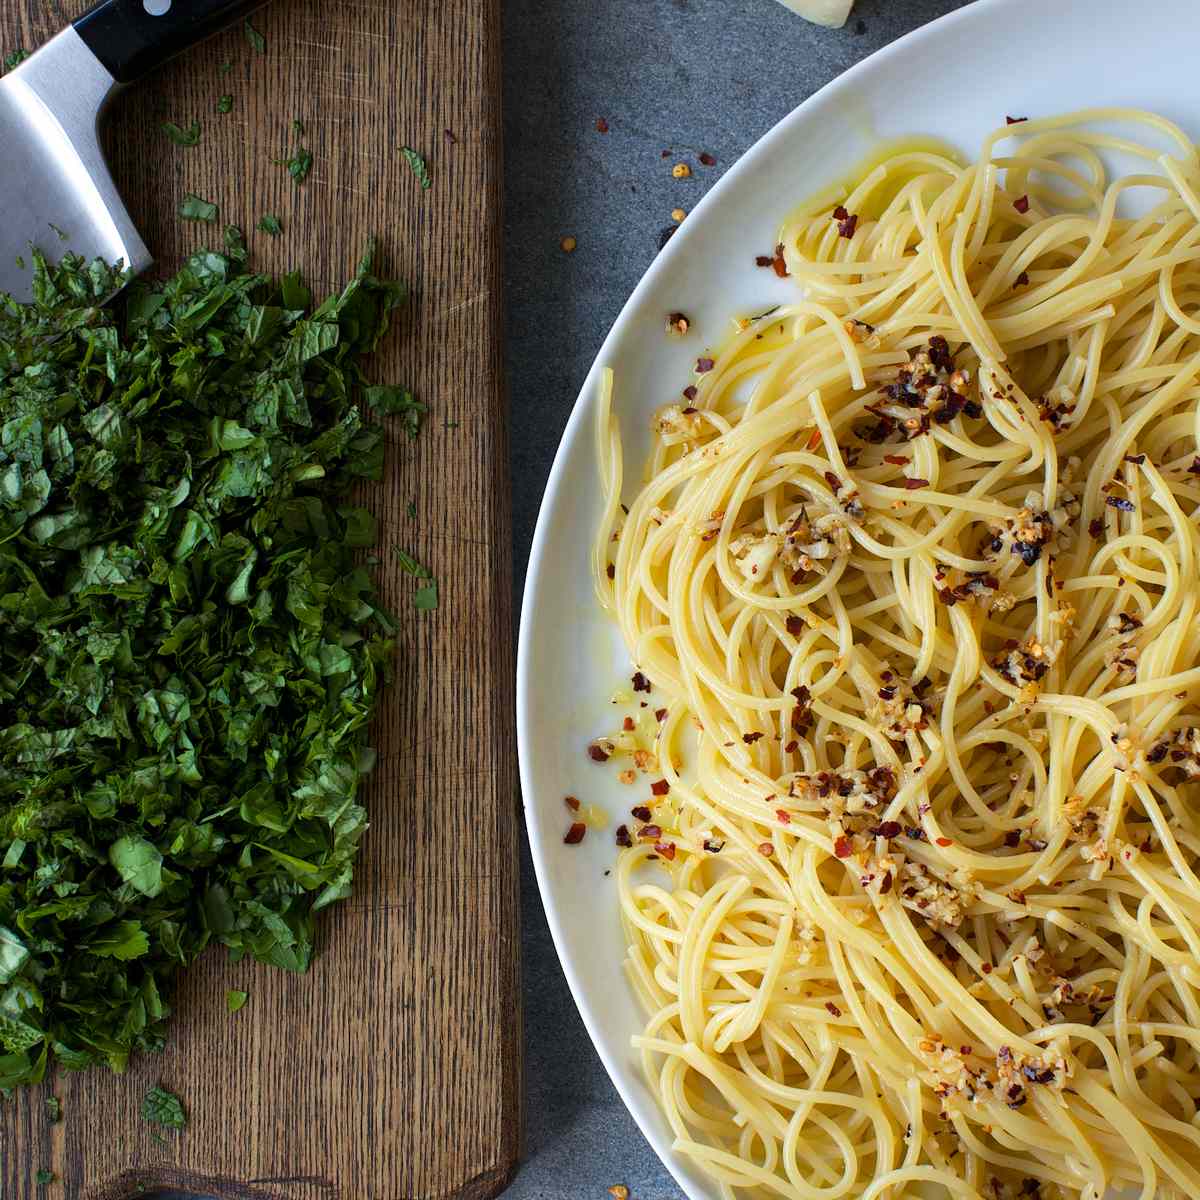 Spicy Spaghetti with Many Herbs